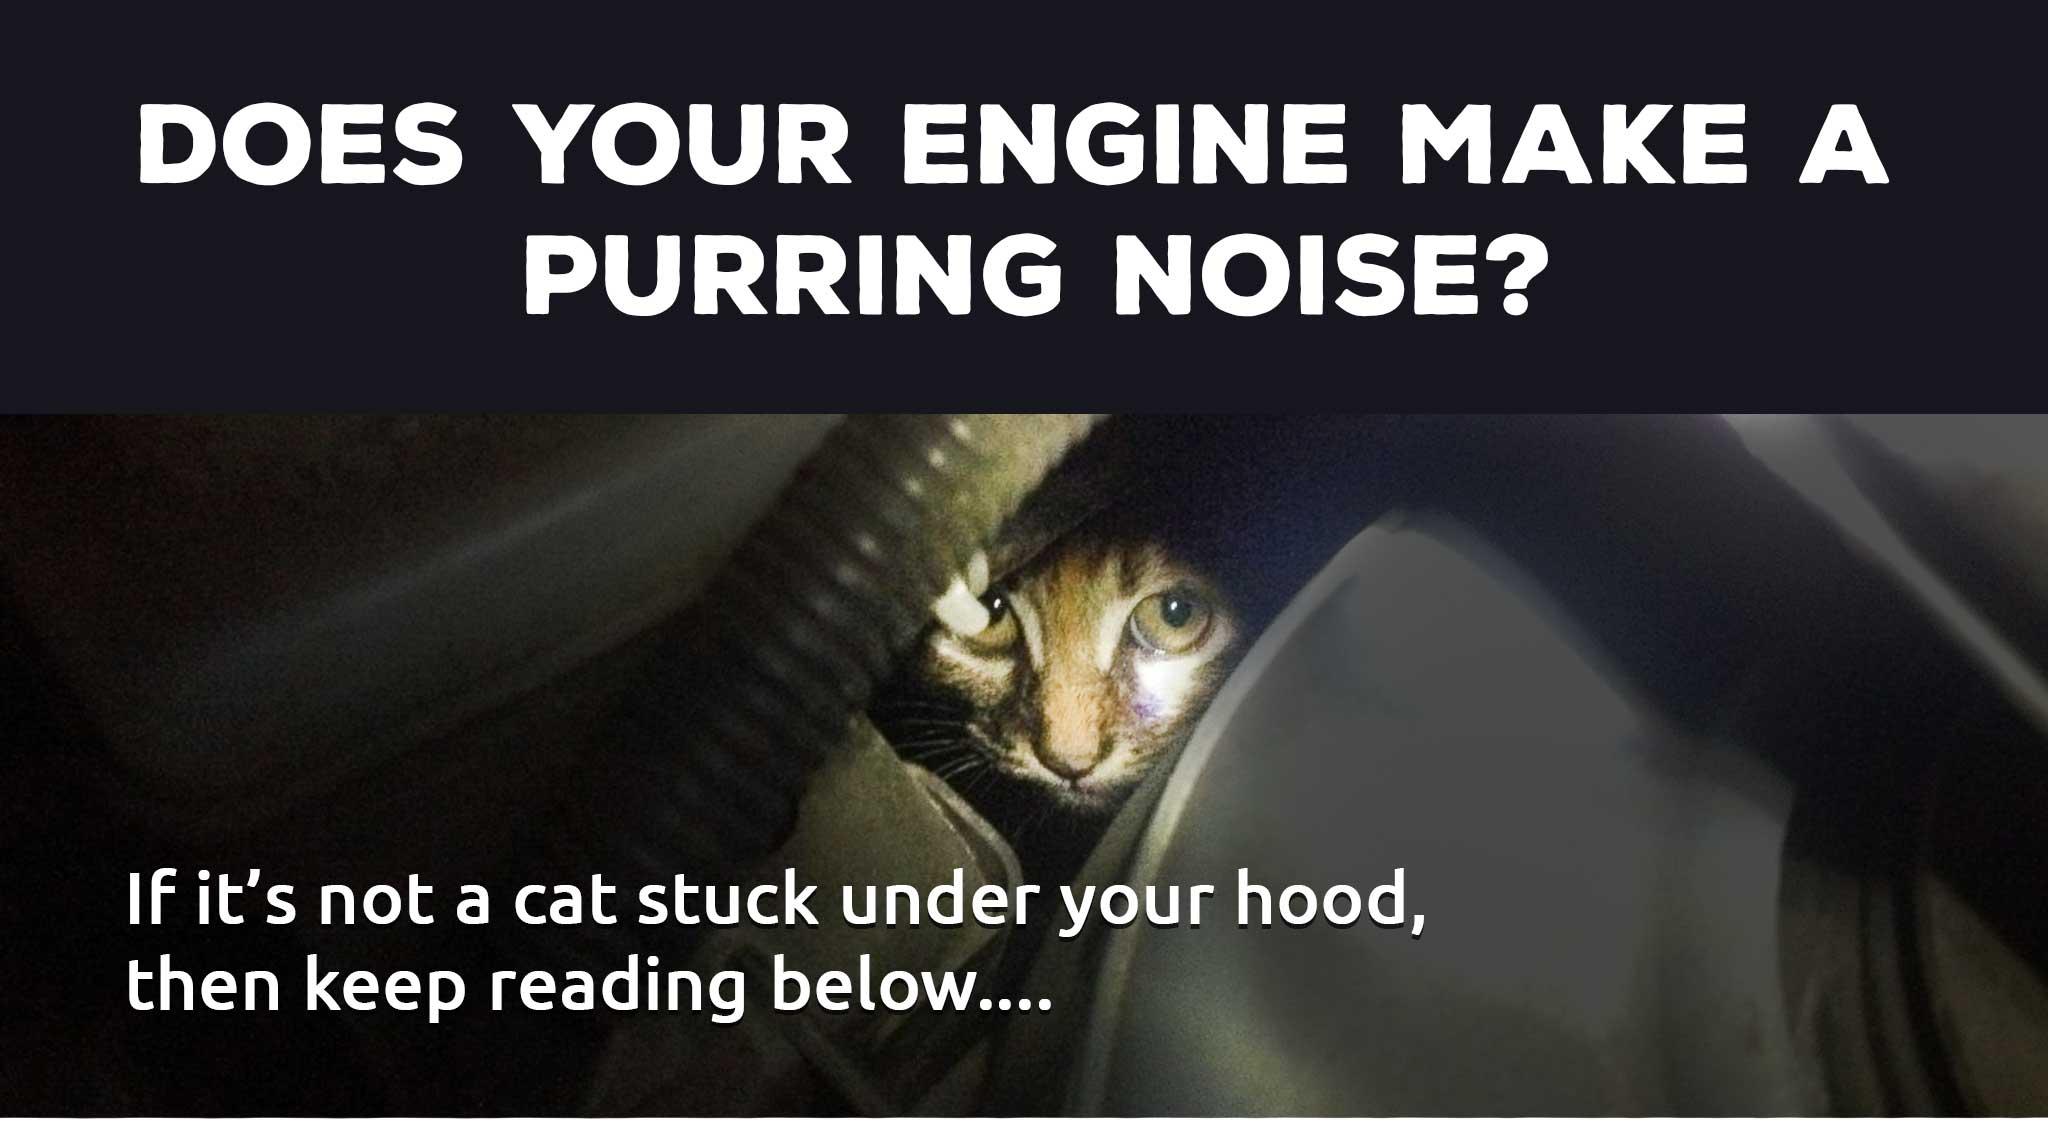 If it’s not a cat stuck under your hood, then keep reading below....